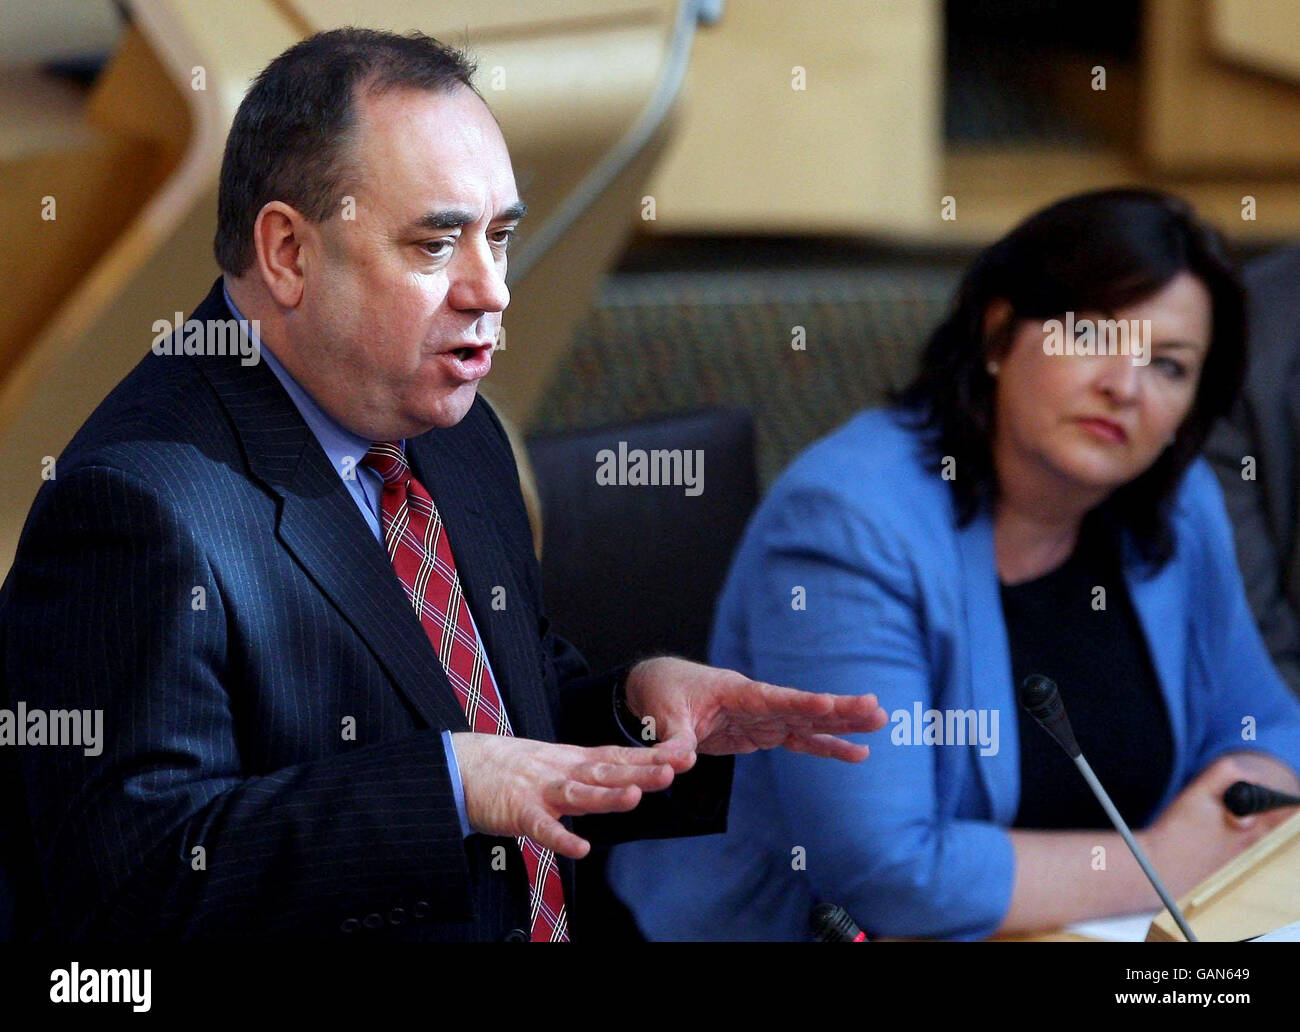 Scottish First Minister, Alex Salmond, during First Ministers Question Time in the Scottish Parliament, Edinburgh. Stock Photo